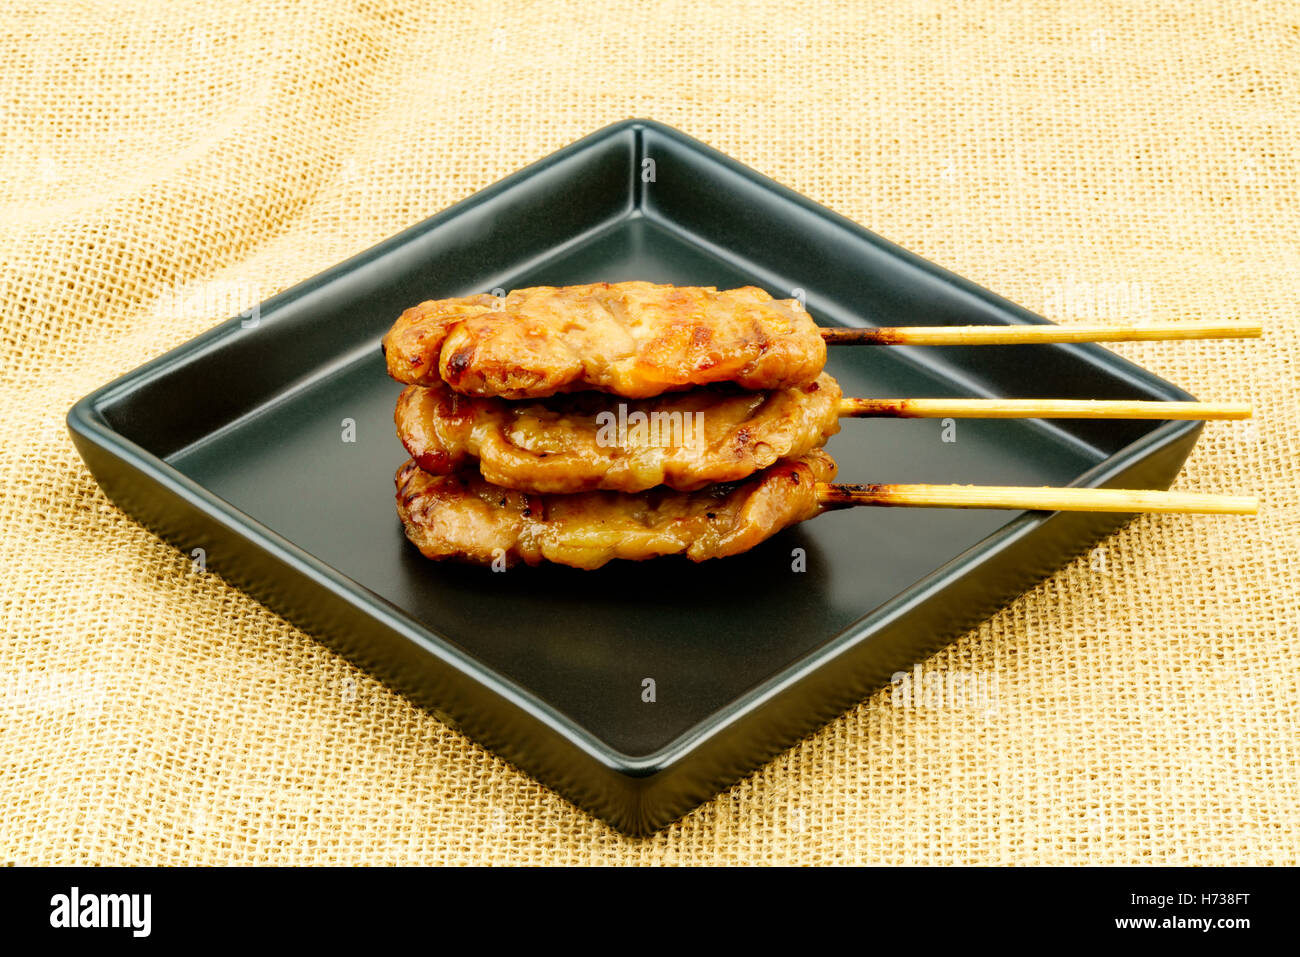 Thai styled pork barbeque in black plate on sackcloth Stock Photo